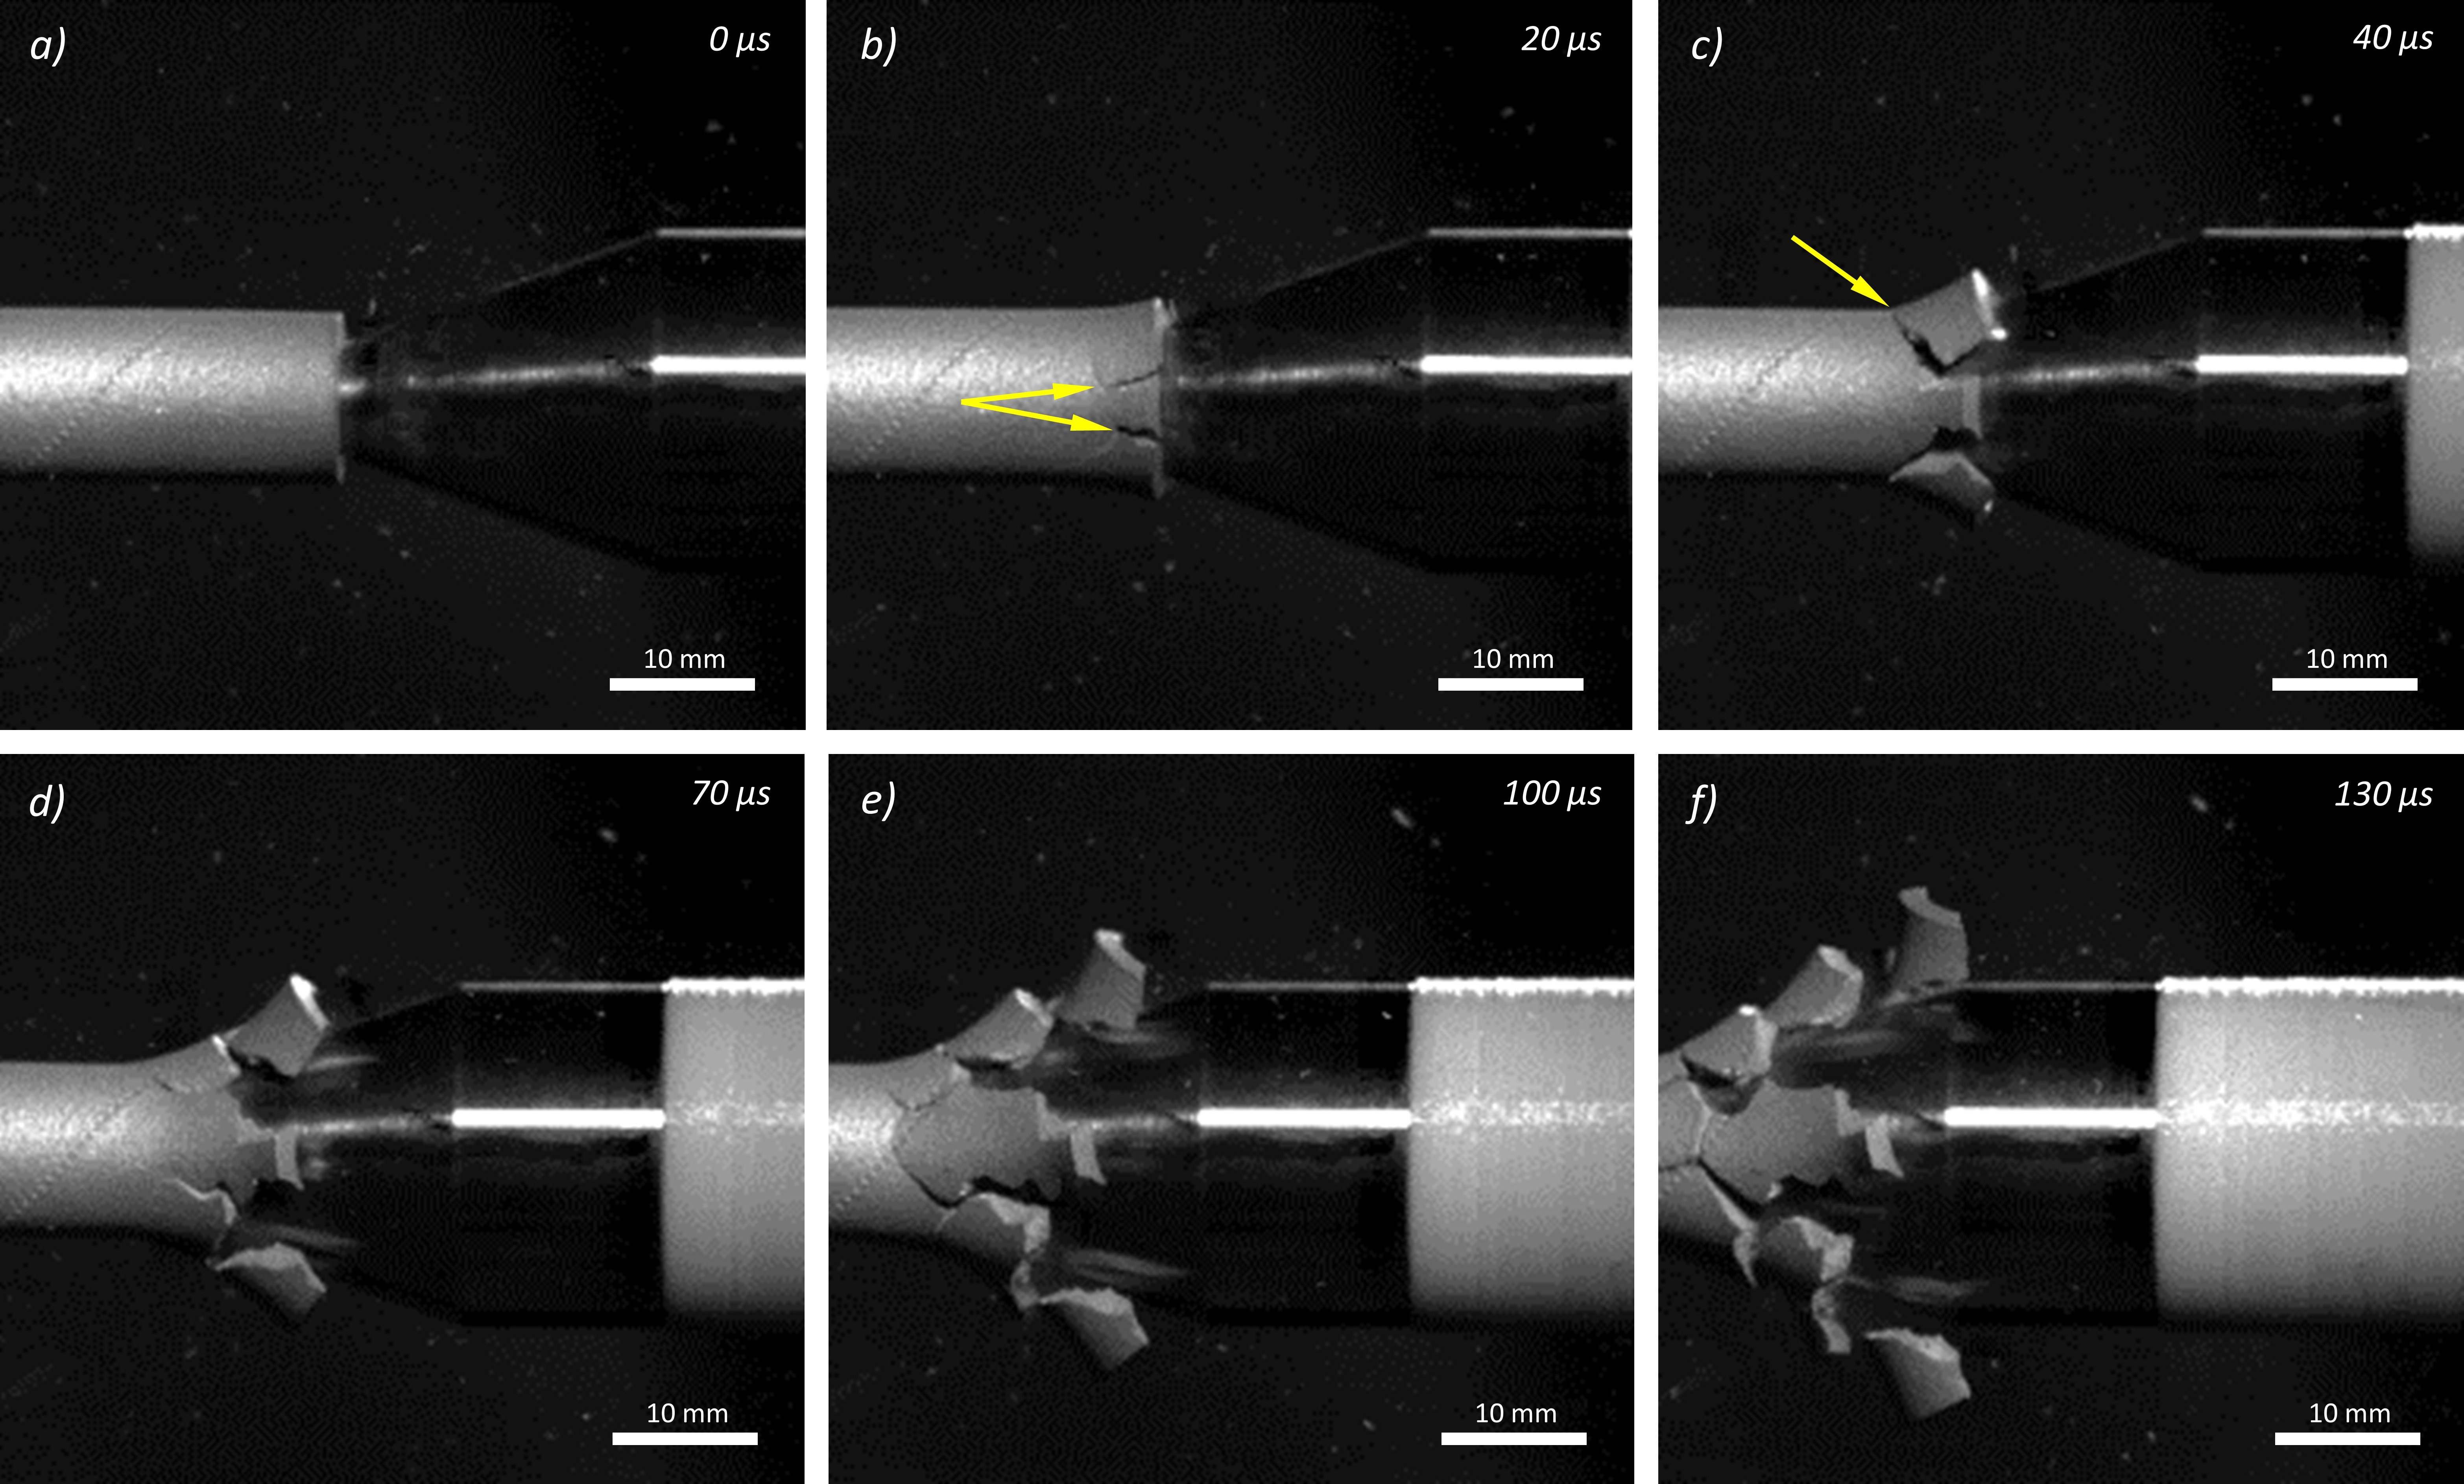 Sequence of frames taken from a high-speed camera recording of the impact of the projectile on the tube during experiments